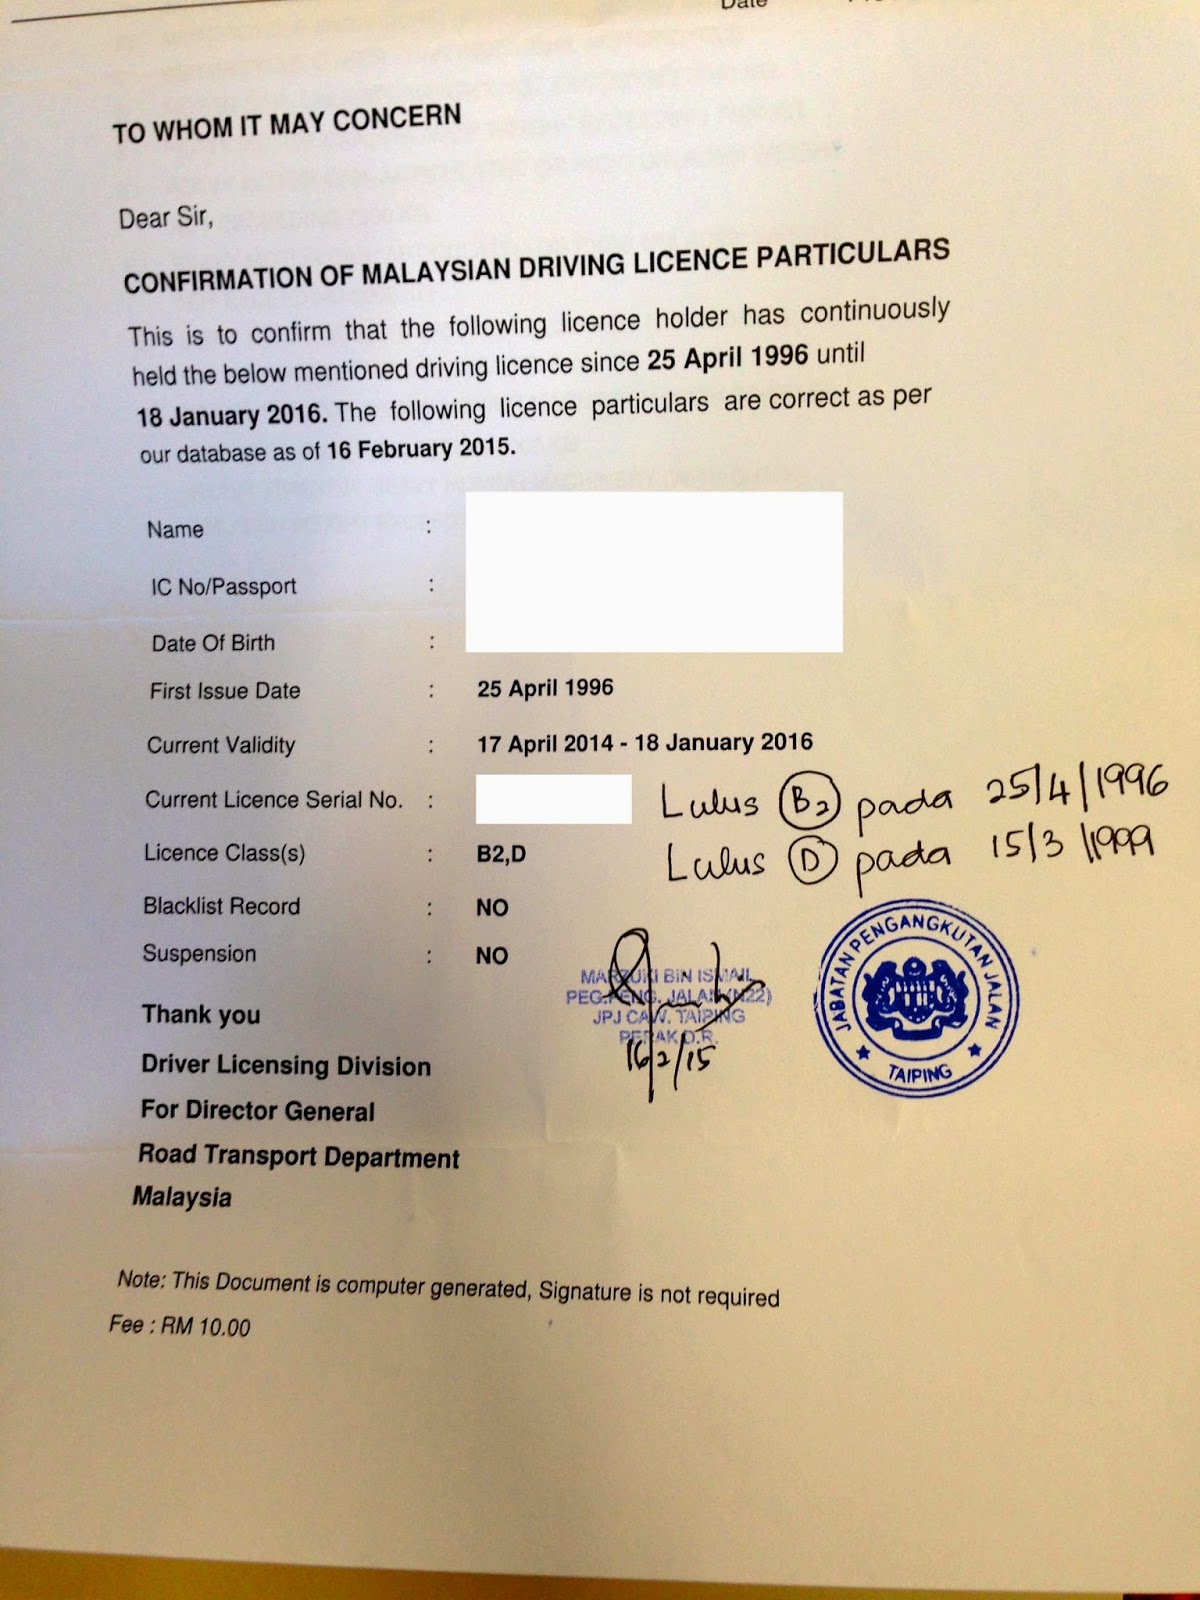 Sample Of Authorised Letter To Jpj - certify letter